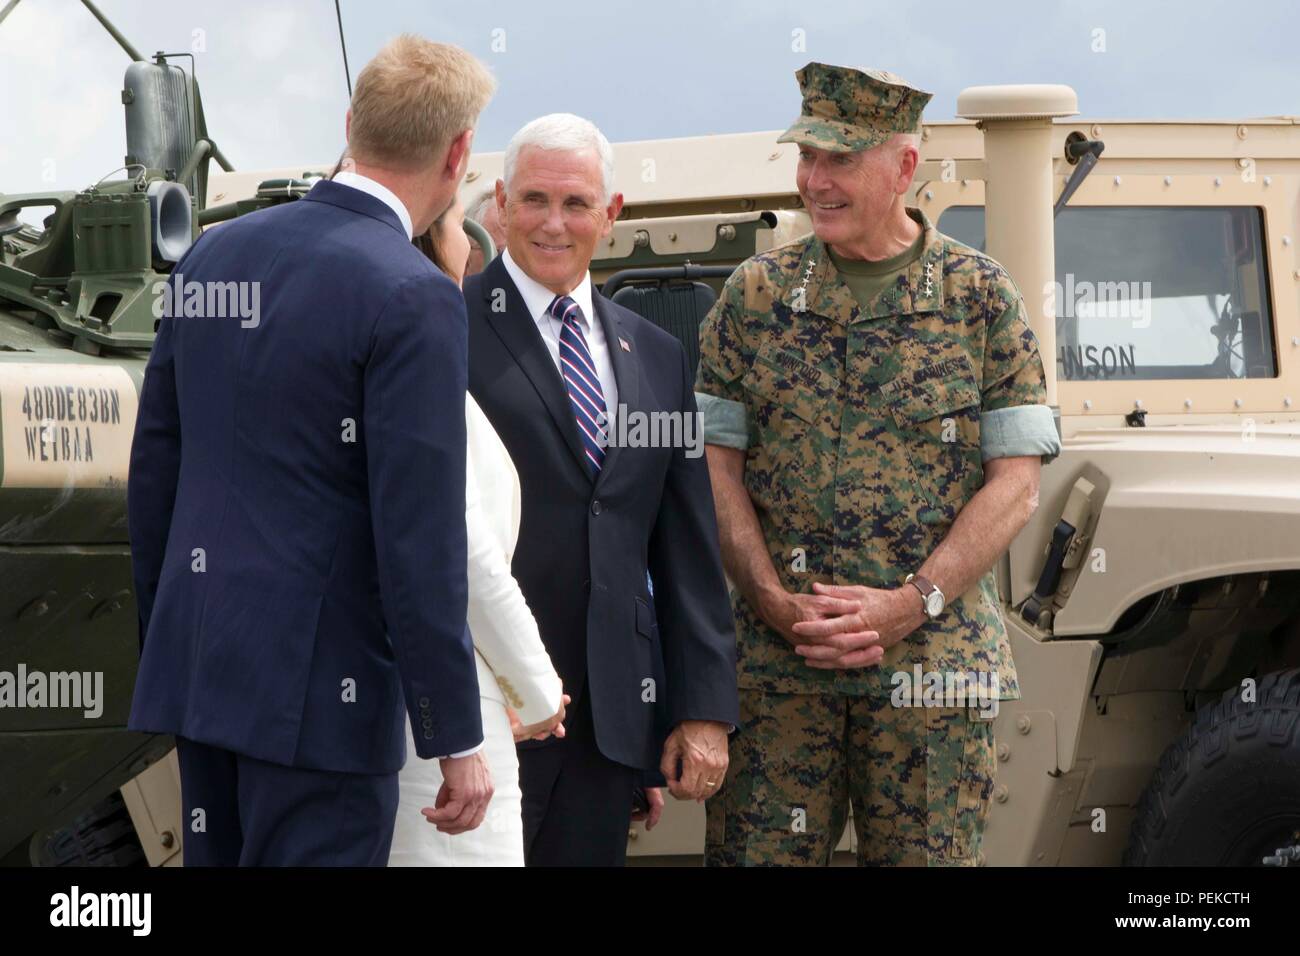 U.S Vice President Mike Pence, center, and Joint Chiefs Chairman Gen. Joseph Dunford, right, during a visit to the 10th Mountain Division, for the signing of the John McCain National Defense Authorization Act August 13, 2018 in Fort Drum, New York. Stock Photo